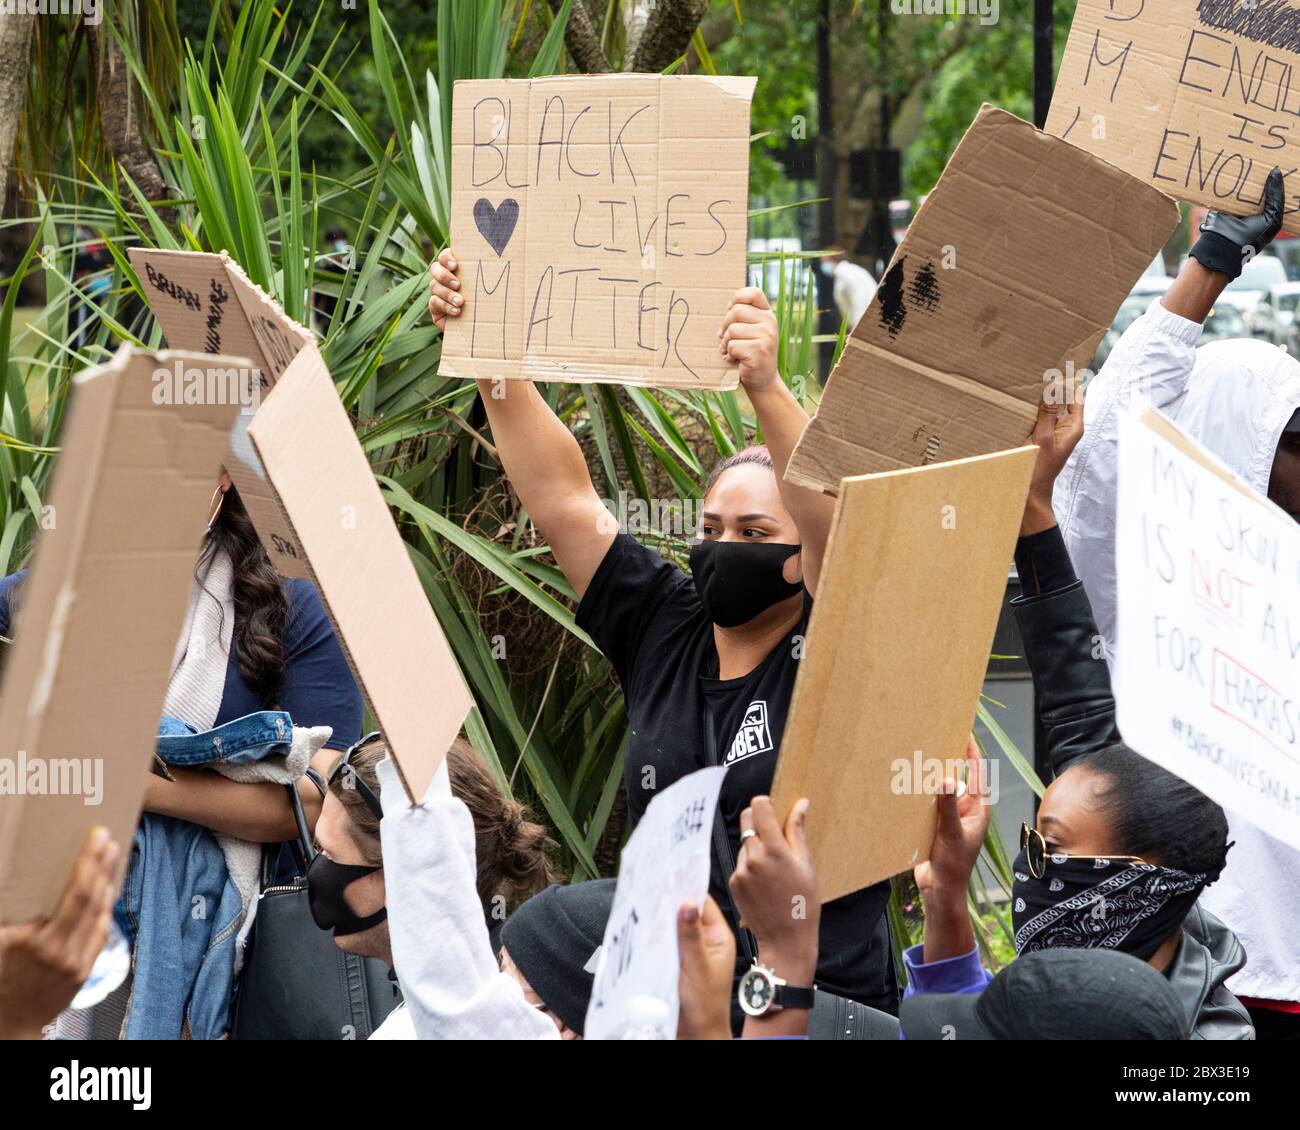 A group of protesters holding up cardboard signs at the Black Lives Matters protest in London, 3 June 2020 Stock Photo